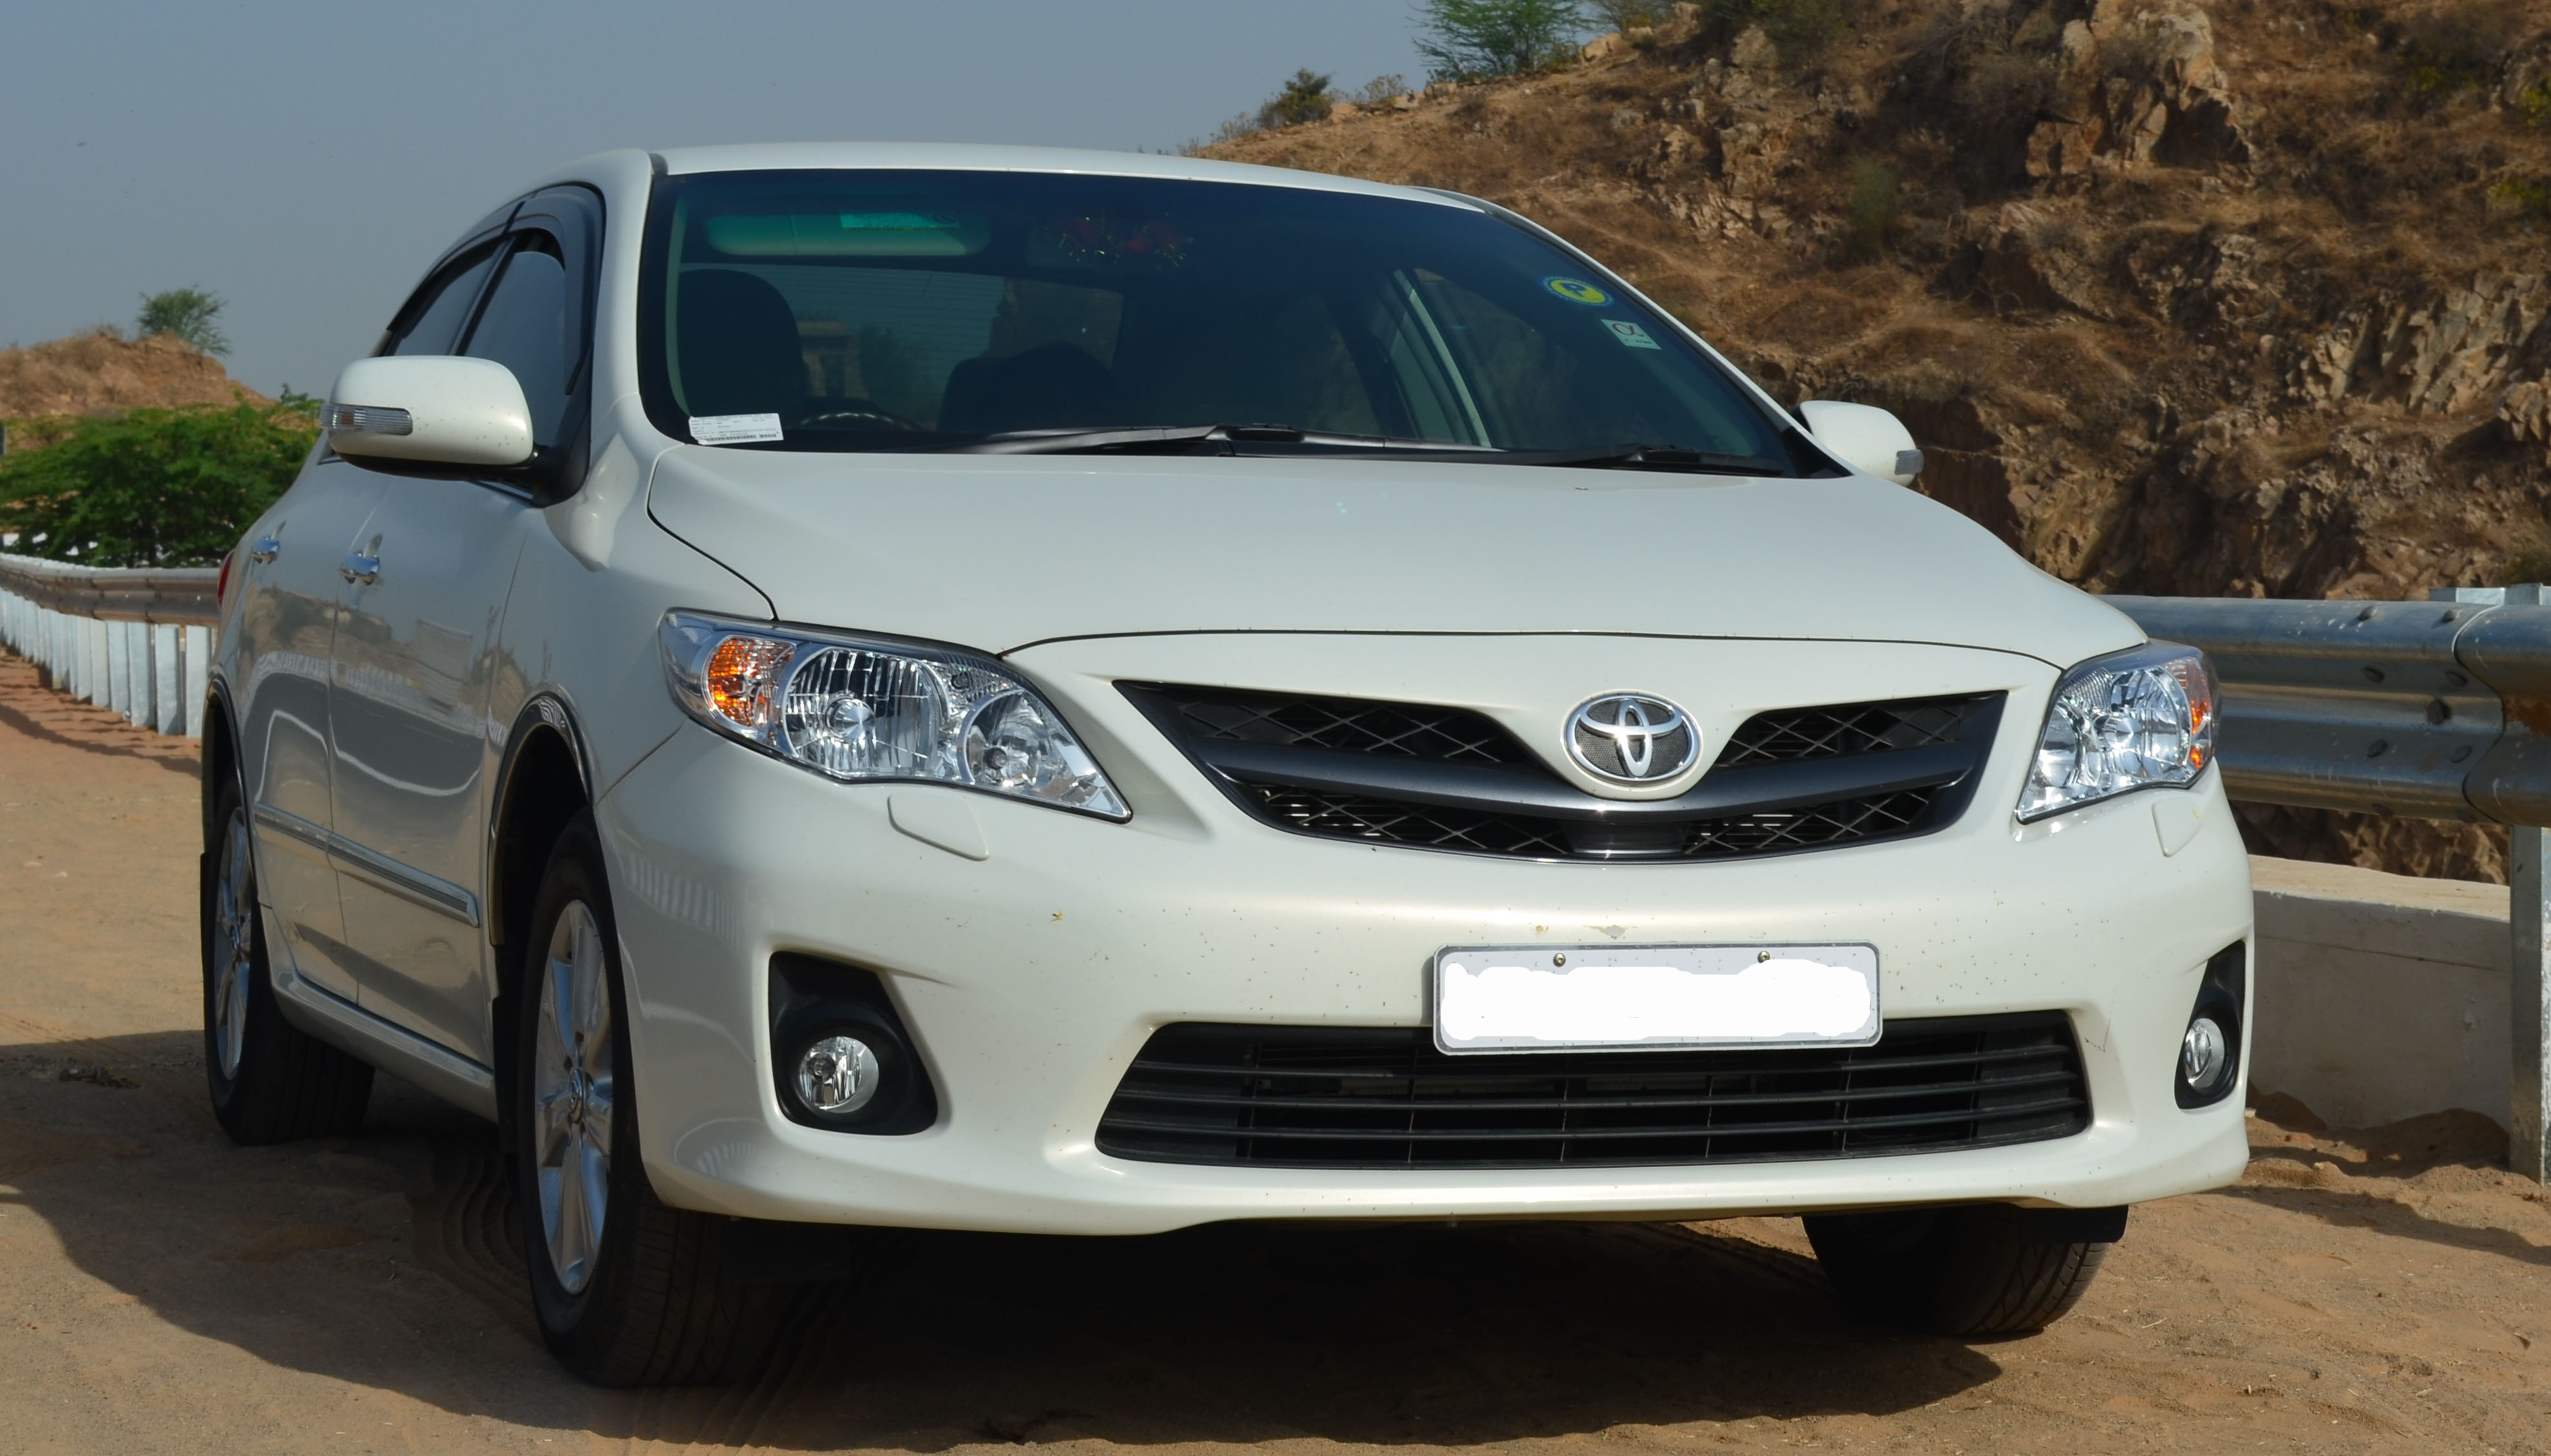 Taxi Hire in Monthly Basis in Delhi